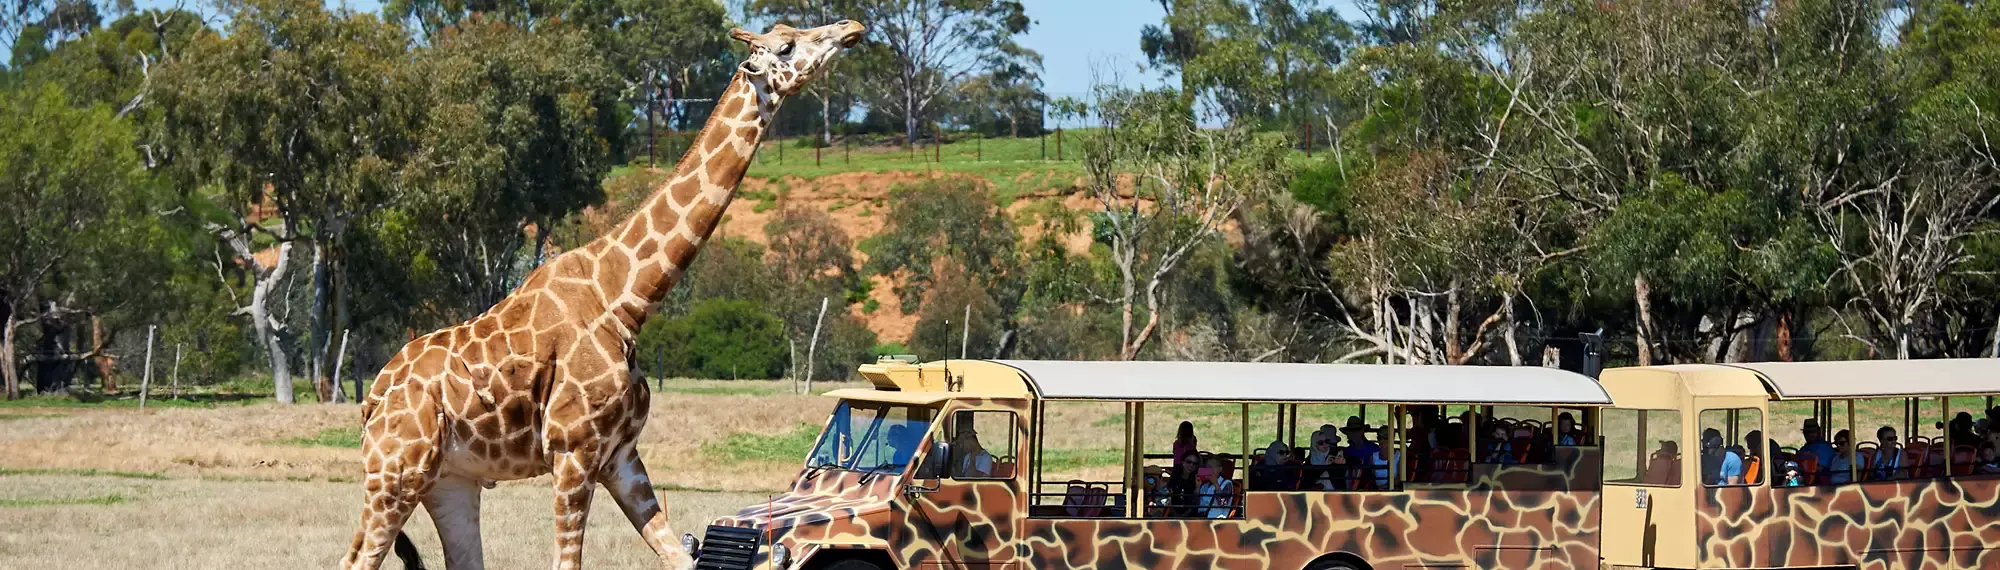 Giraffe standing right next to a bus covered in giraffe print.